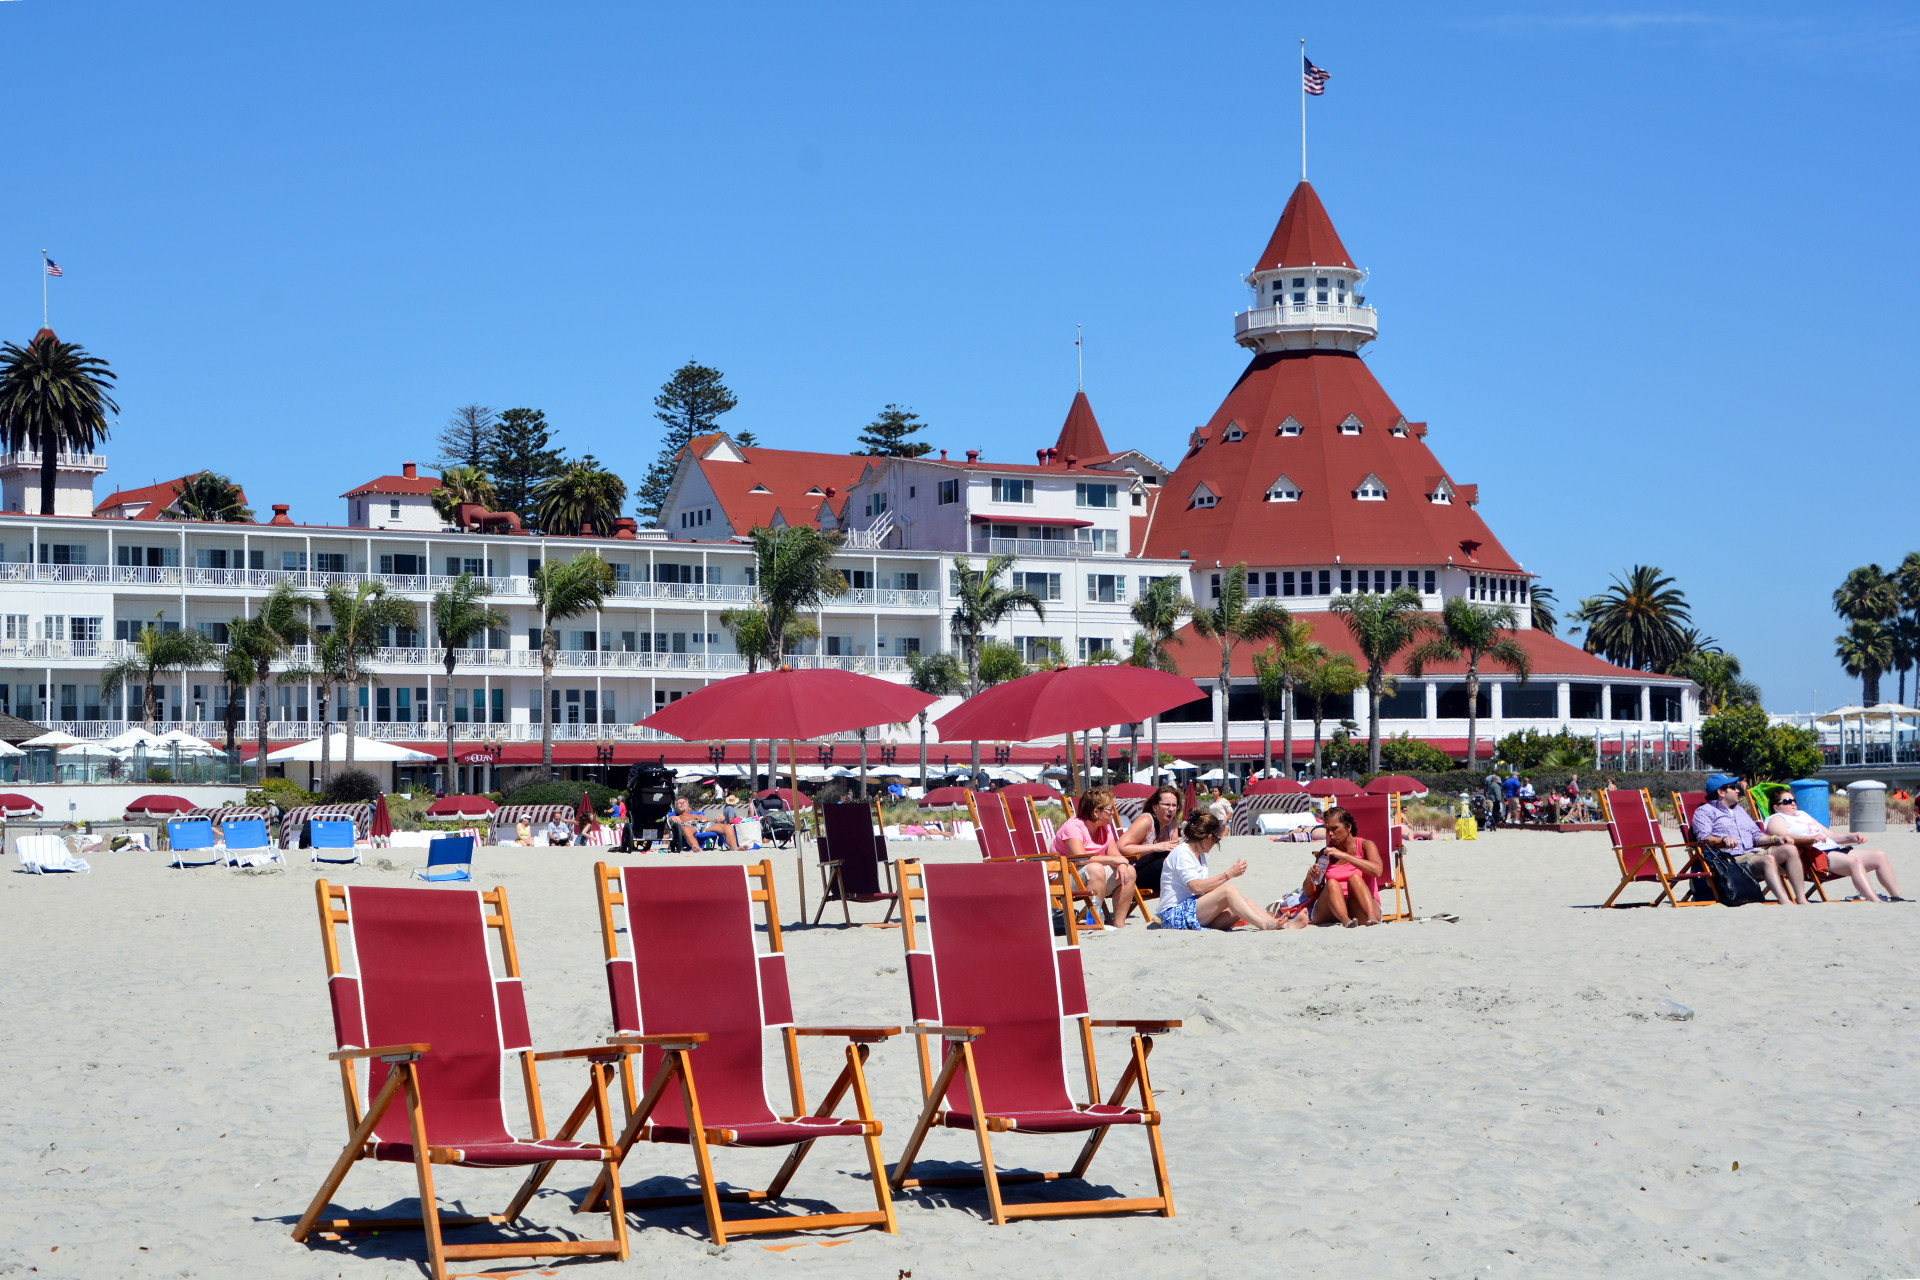 Head down to Coronado Island to see the famous Hotel del Coronado.<p><a href="https://www.msn.com/en-us/community/channel/vid-7xx8mnucu55yw63we9va2gwr7uihbxwc68fxqp25x6tg4ftibpra?cvid=94631541bc0f4f89bfd59158d696ad7e">Follow us and access great exclusive content every day</a></p>